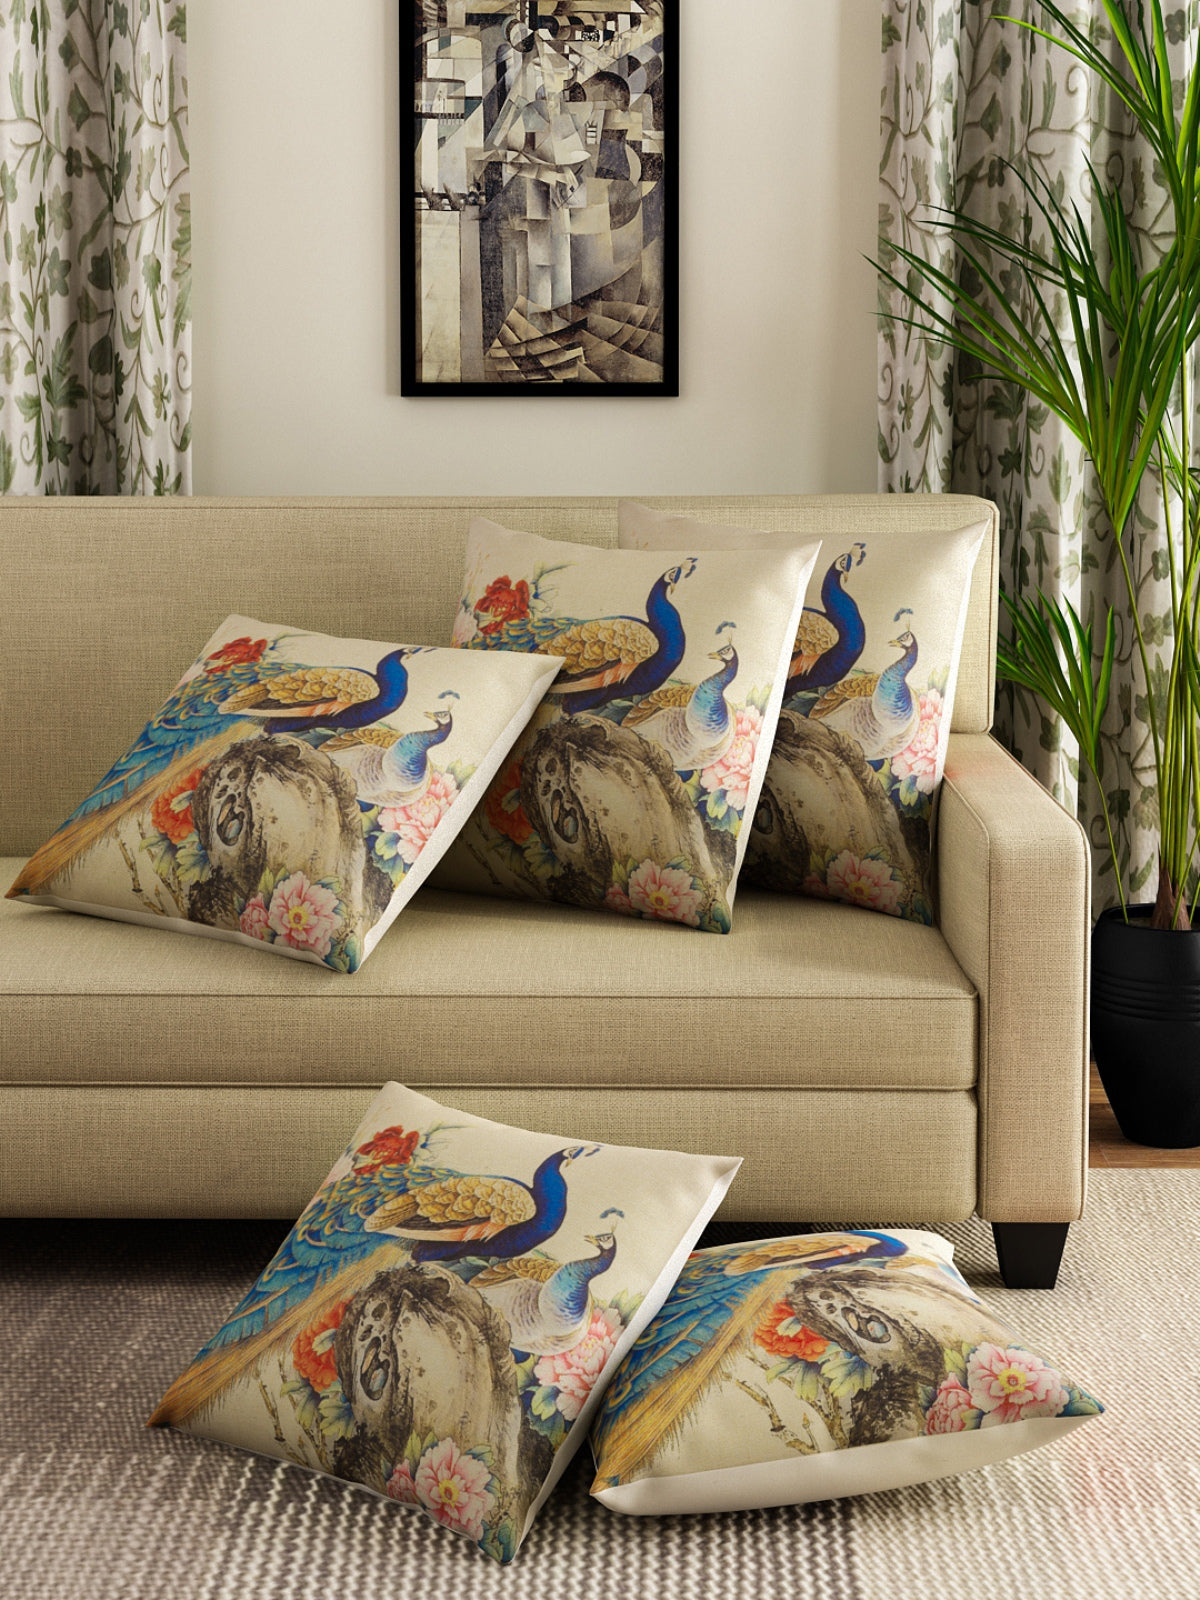 Soft Jute Peacock Print Throw Pillow/Cushion Covers 16x16 inch Set of 5 - Multicolor